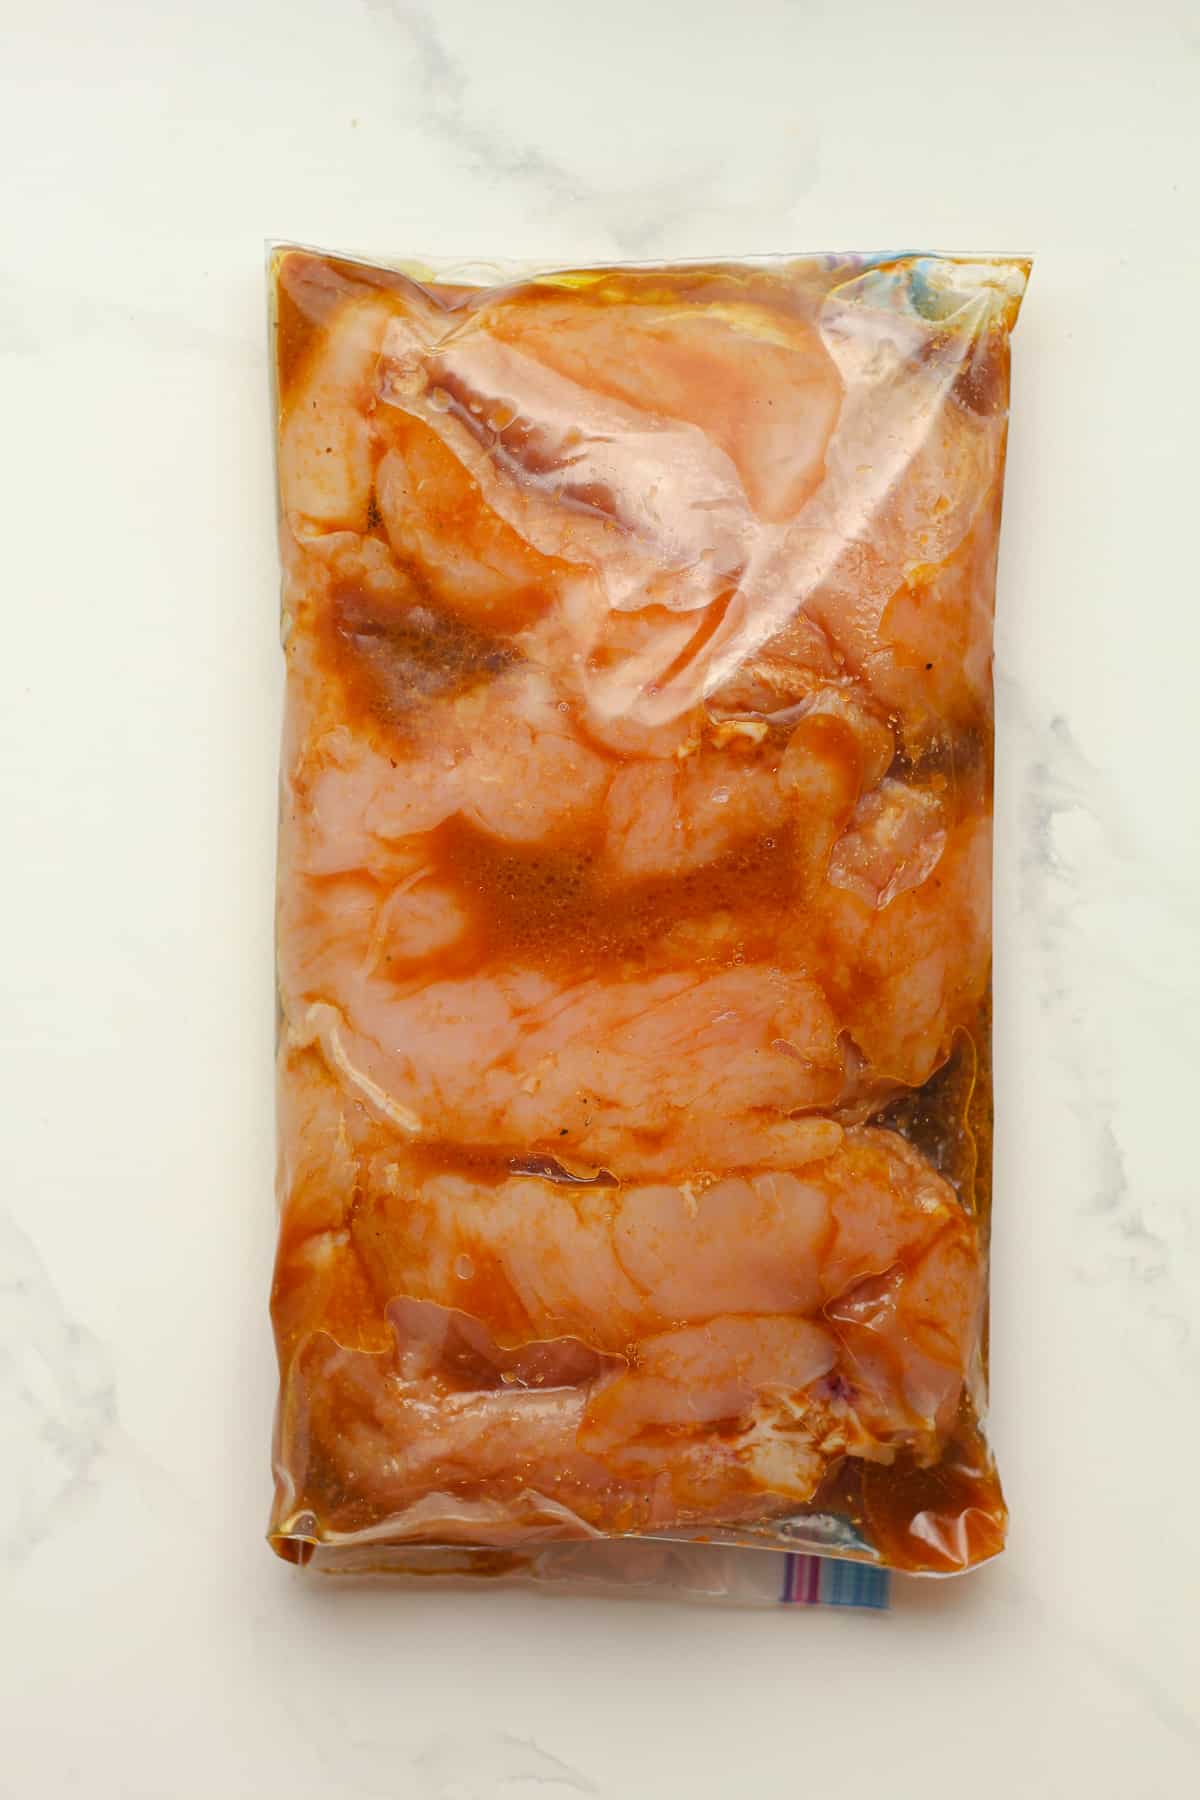 A bag of the chicken breasts in the marinade.